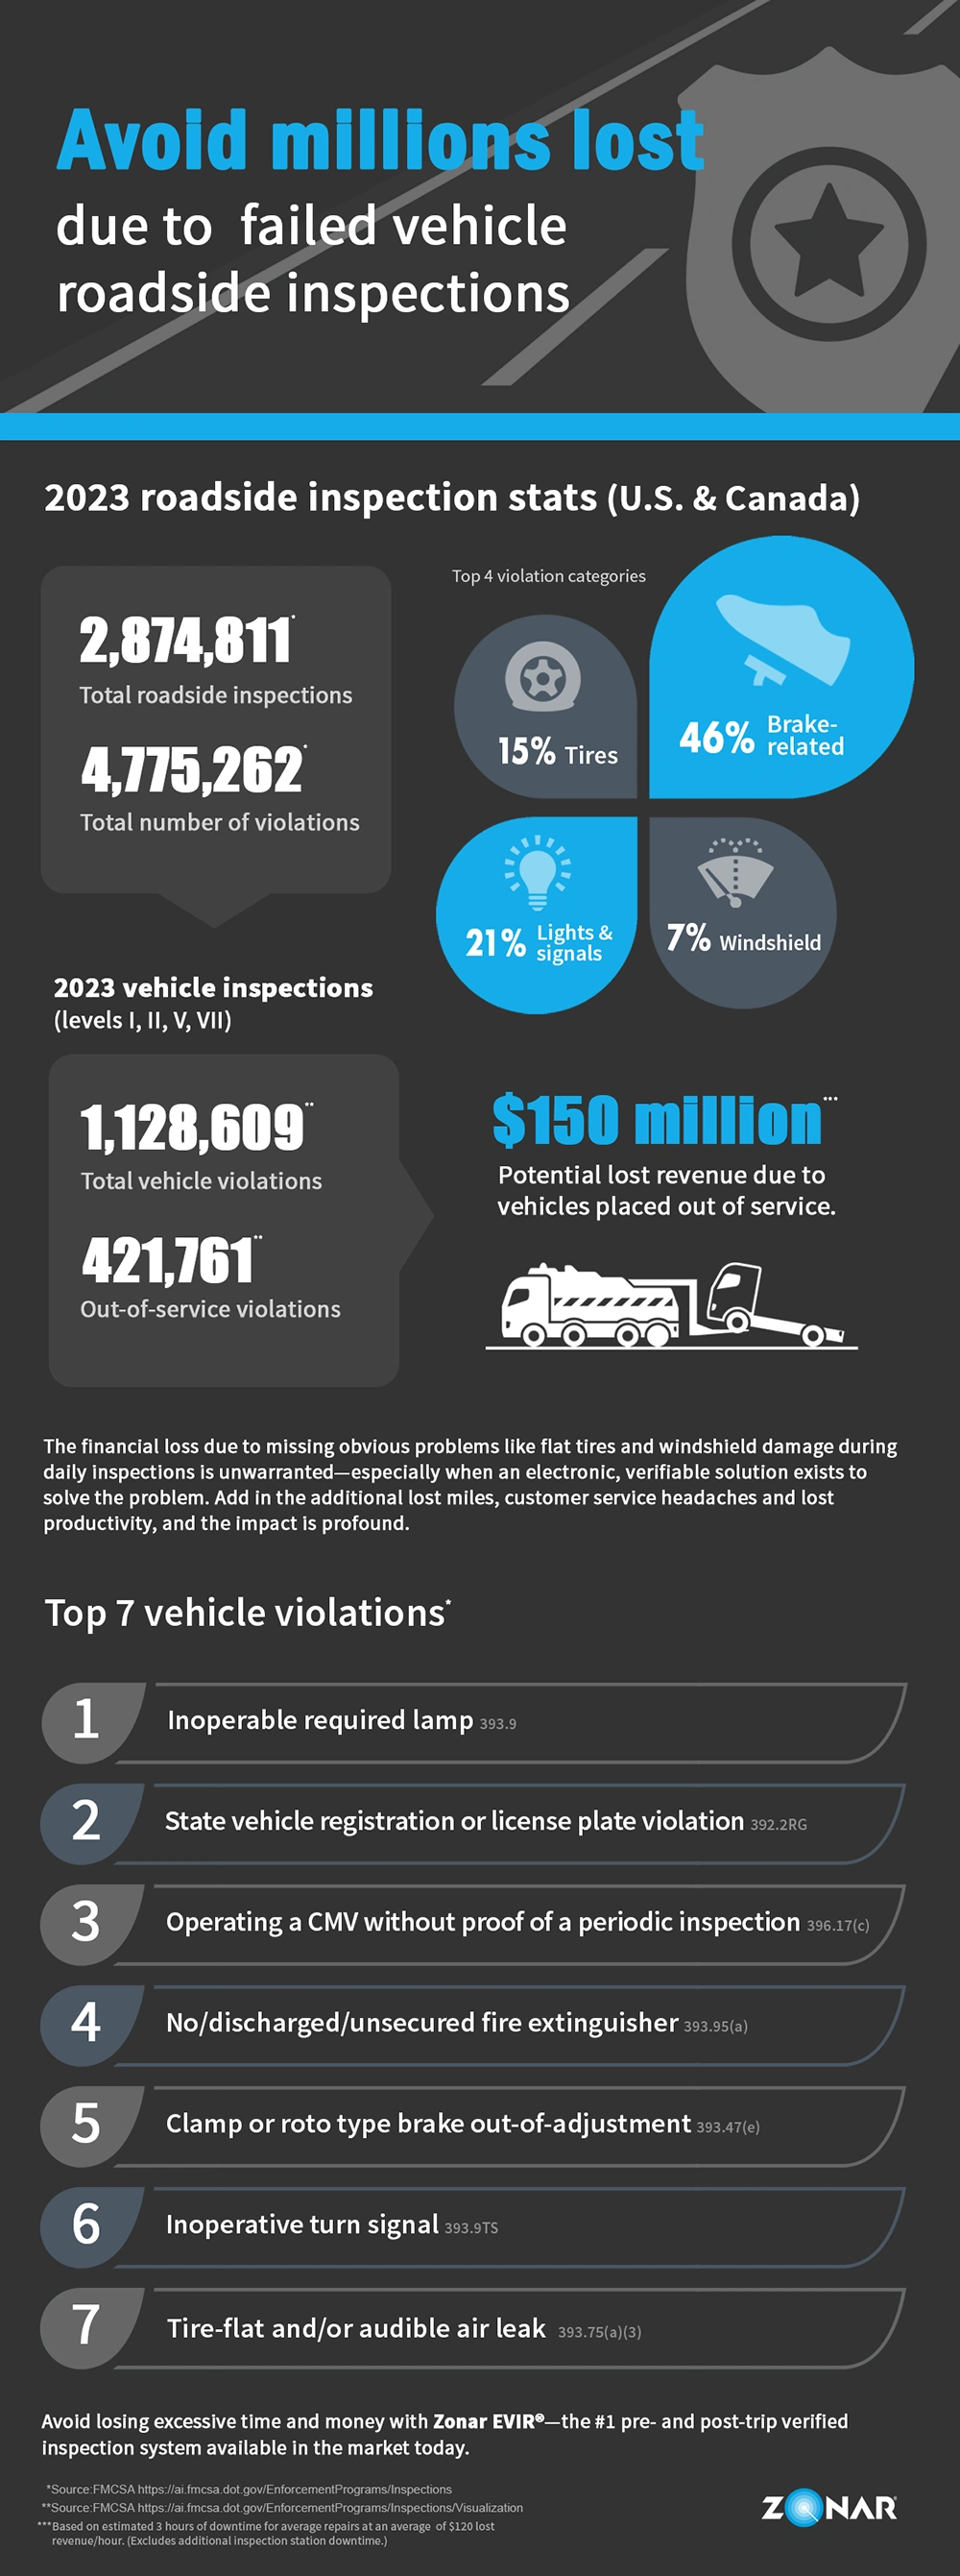 Avoid millions lost due to downtime for failed roadside inspections with